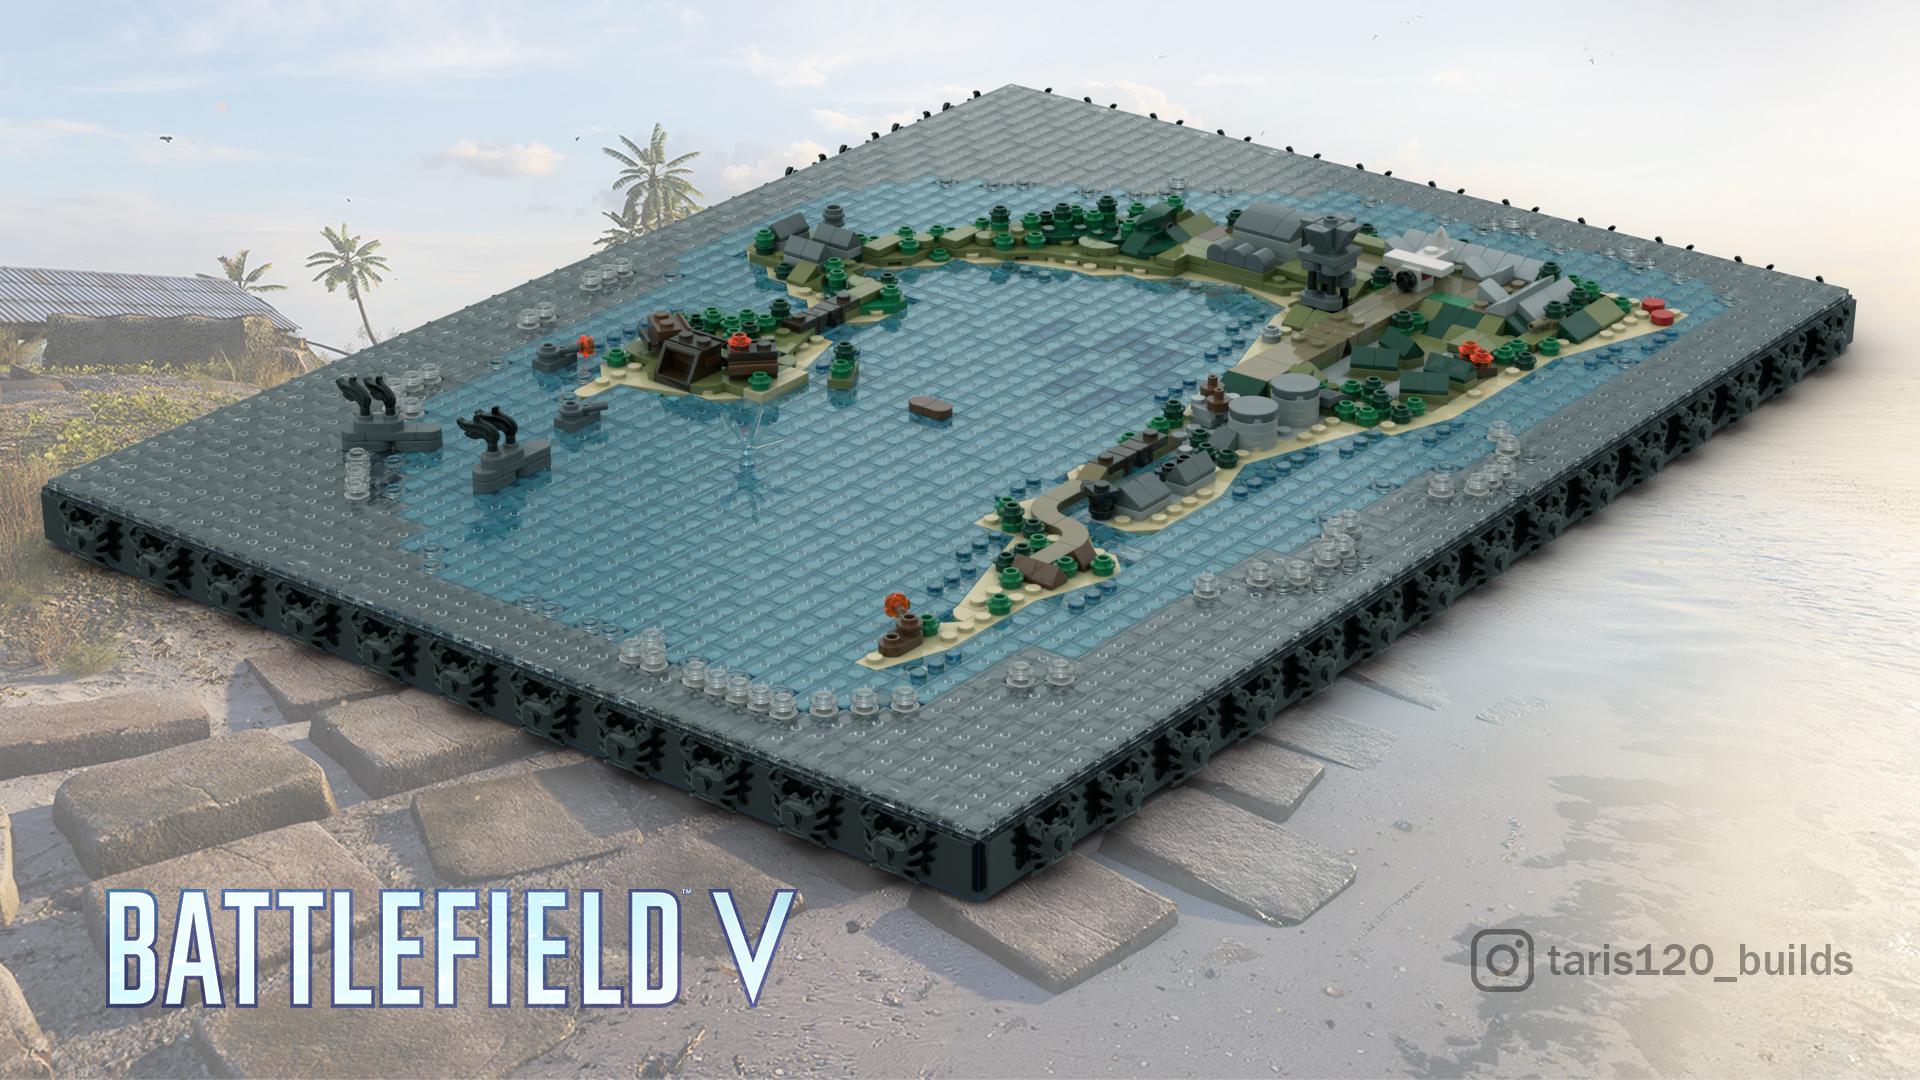 you cant tweet anymore'' on Twitter: "Some cool Battlefield V maps made LEGO (First 3 by Taris120, Last one is by RealThe_B1G_E) https://t.co/TtyJsI1uFt" / Twitter